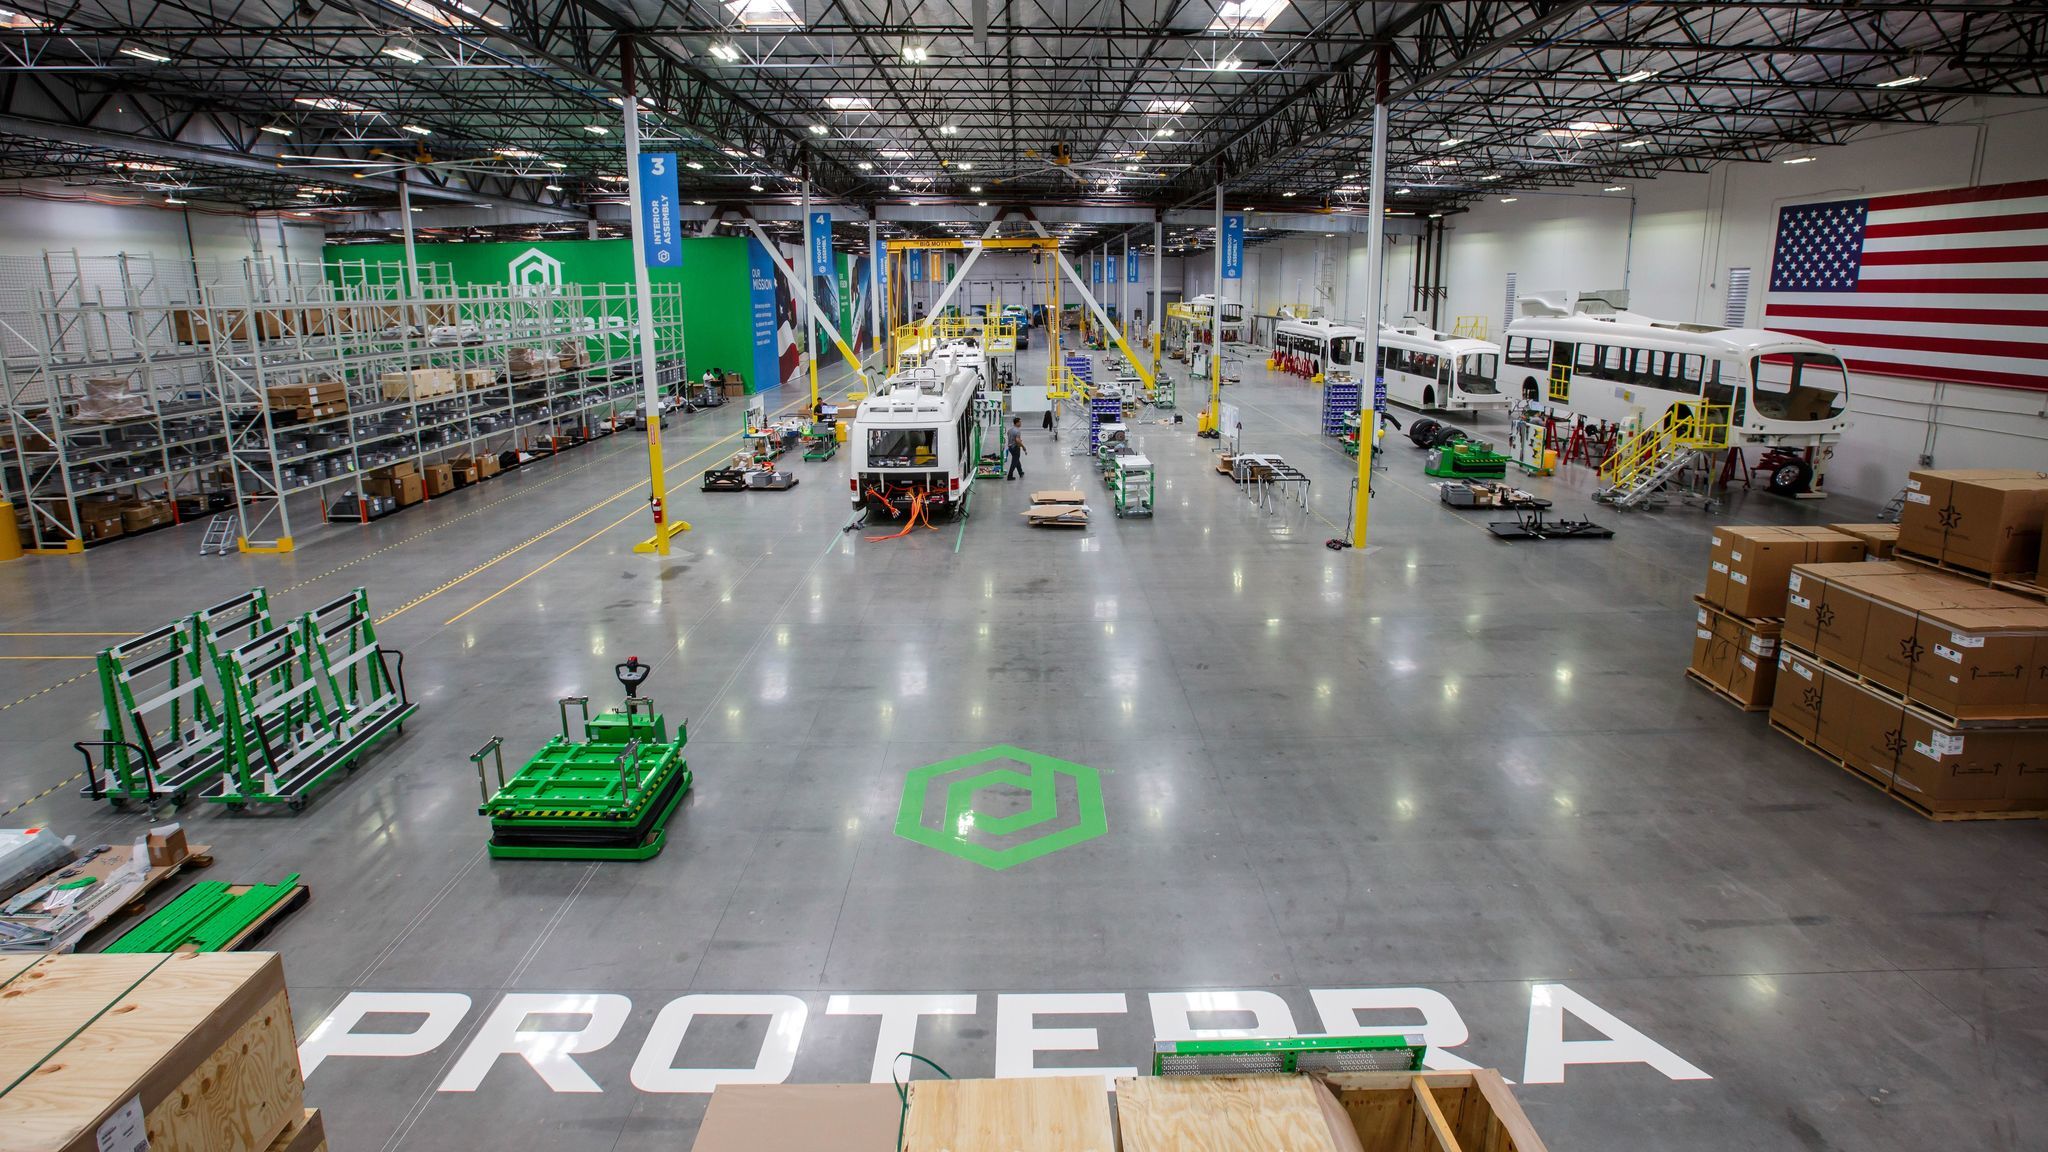 Before Proterra starting building buses here, Amazon used the space as a temporary holiday distribution center.